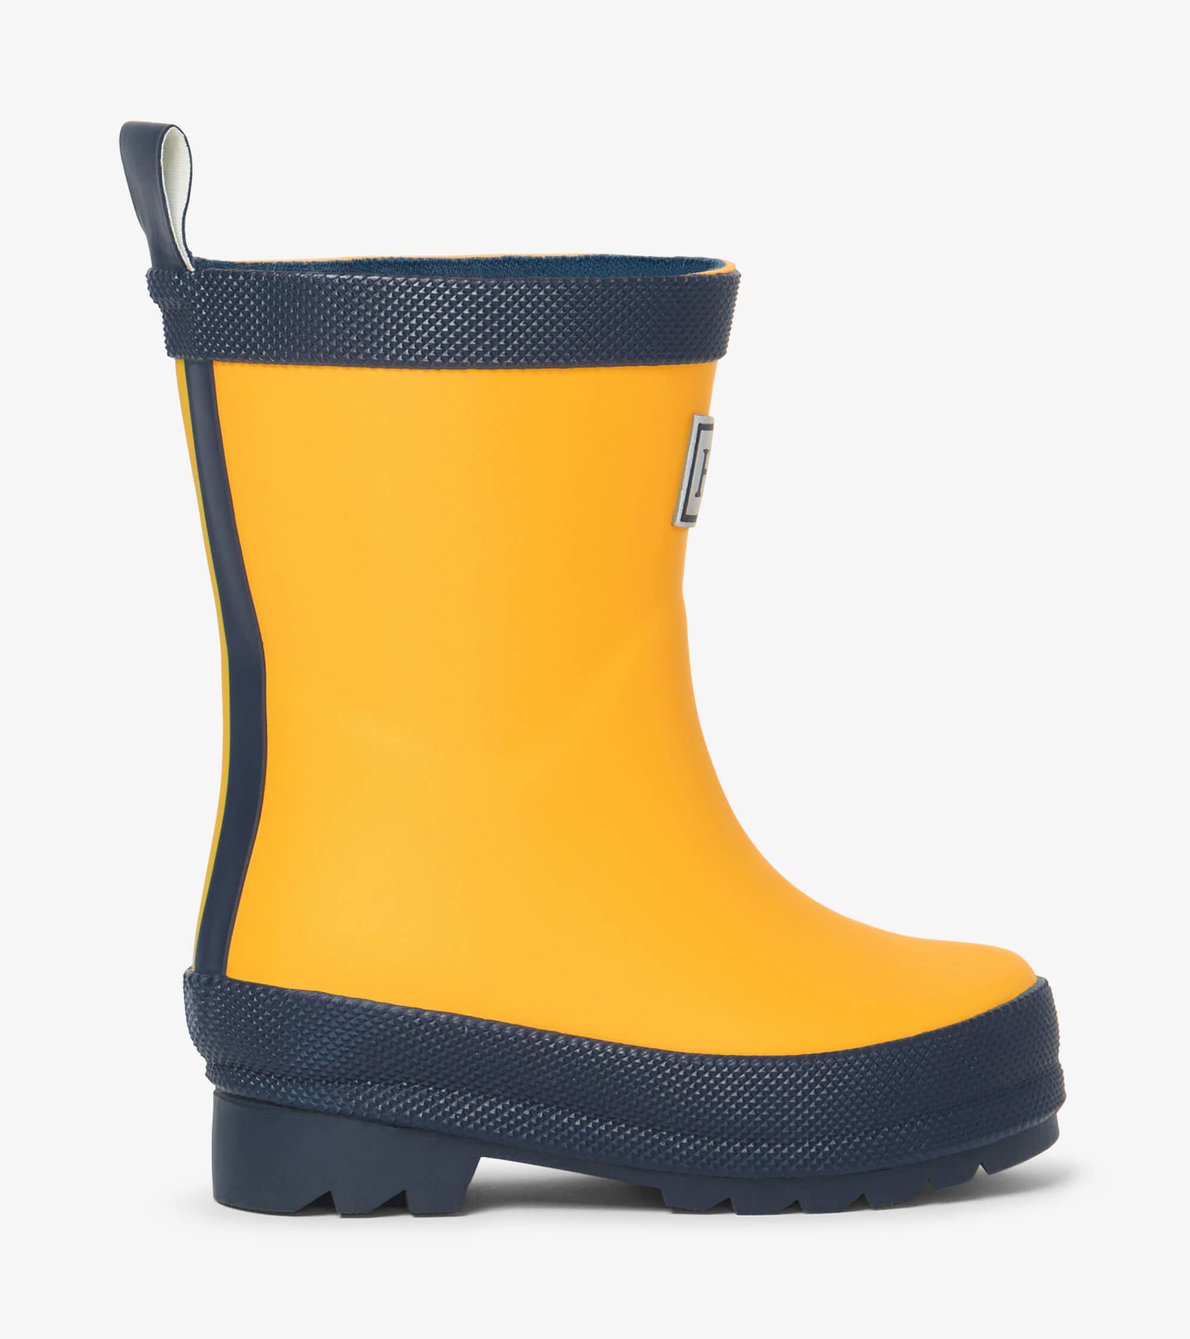 View larger image of My 1st Rain Boots - Yellow & Navy